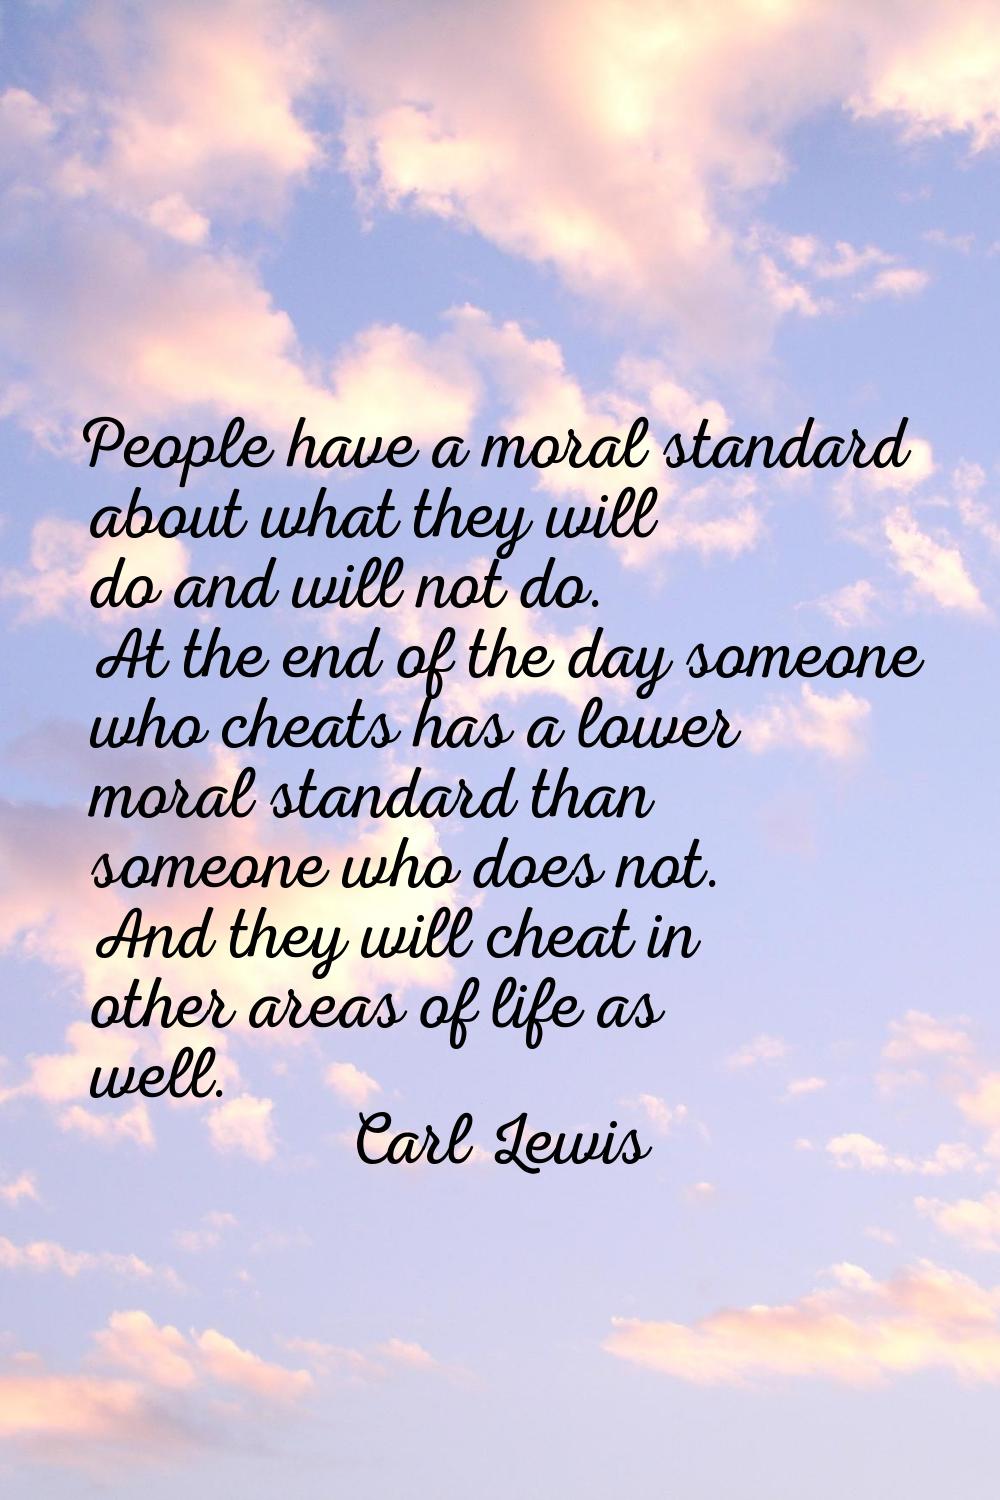 People have a moral standard about what they will do and will not do. At the end of the day someone